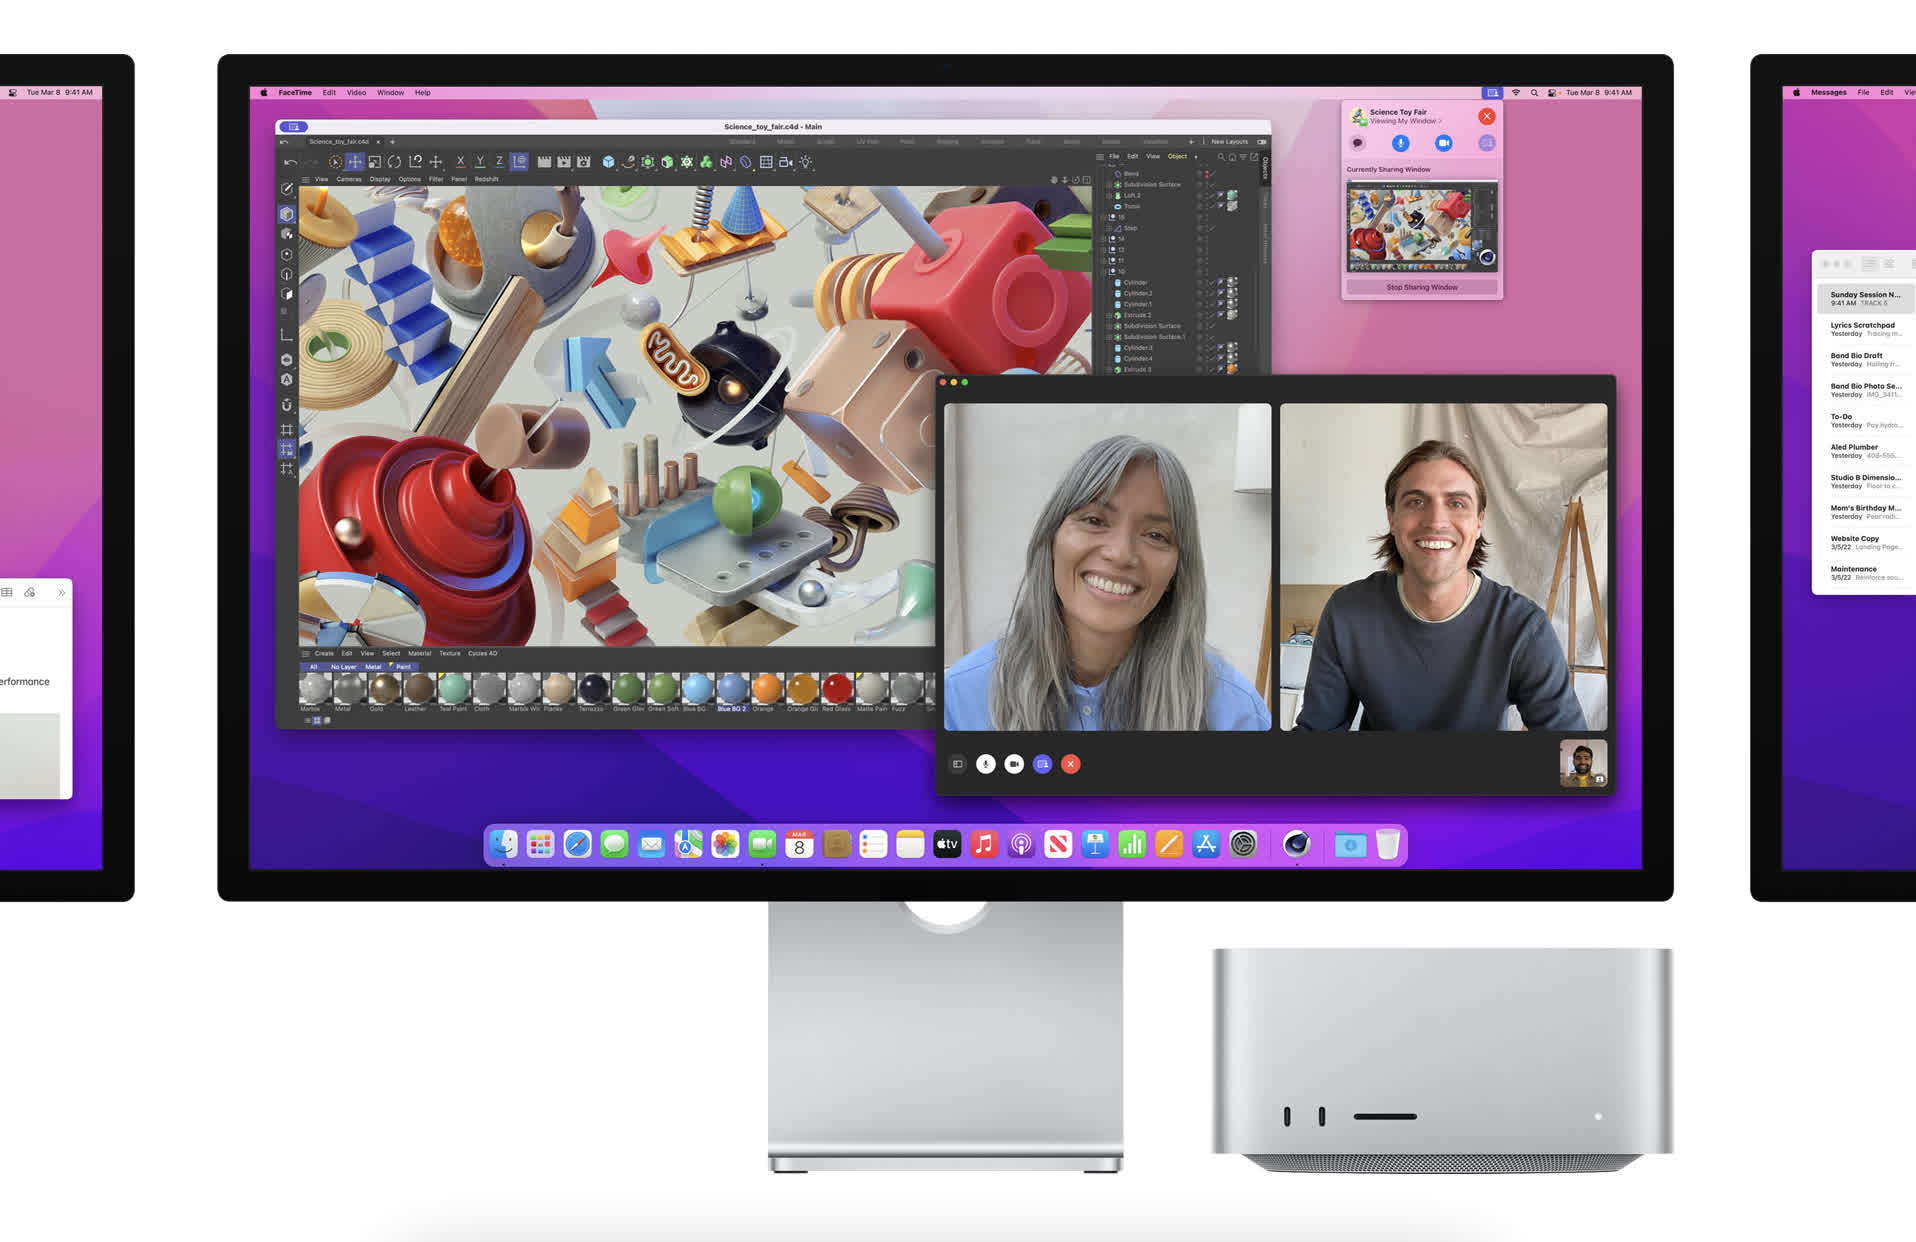 Apple is working on new monitors, including one that would double as a smart home display when not in use